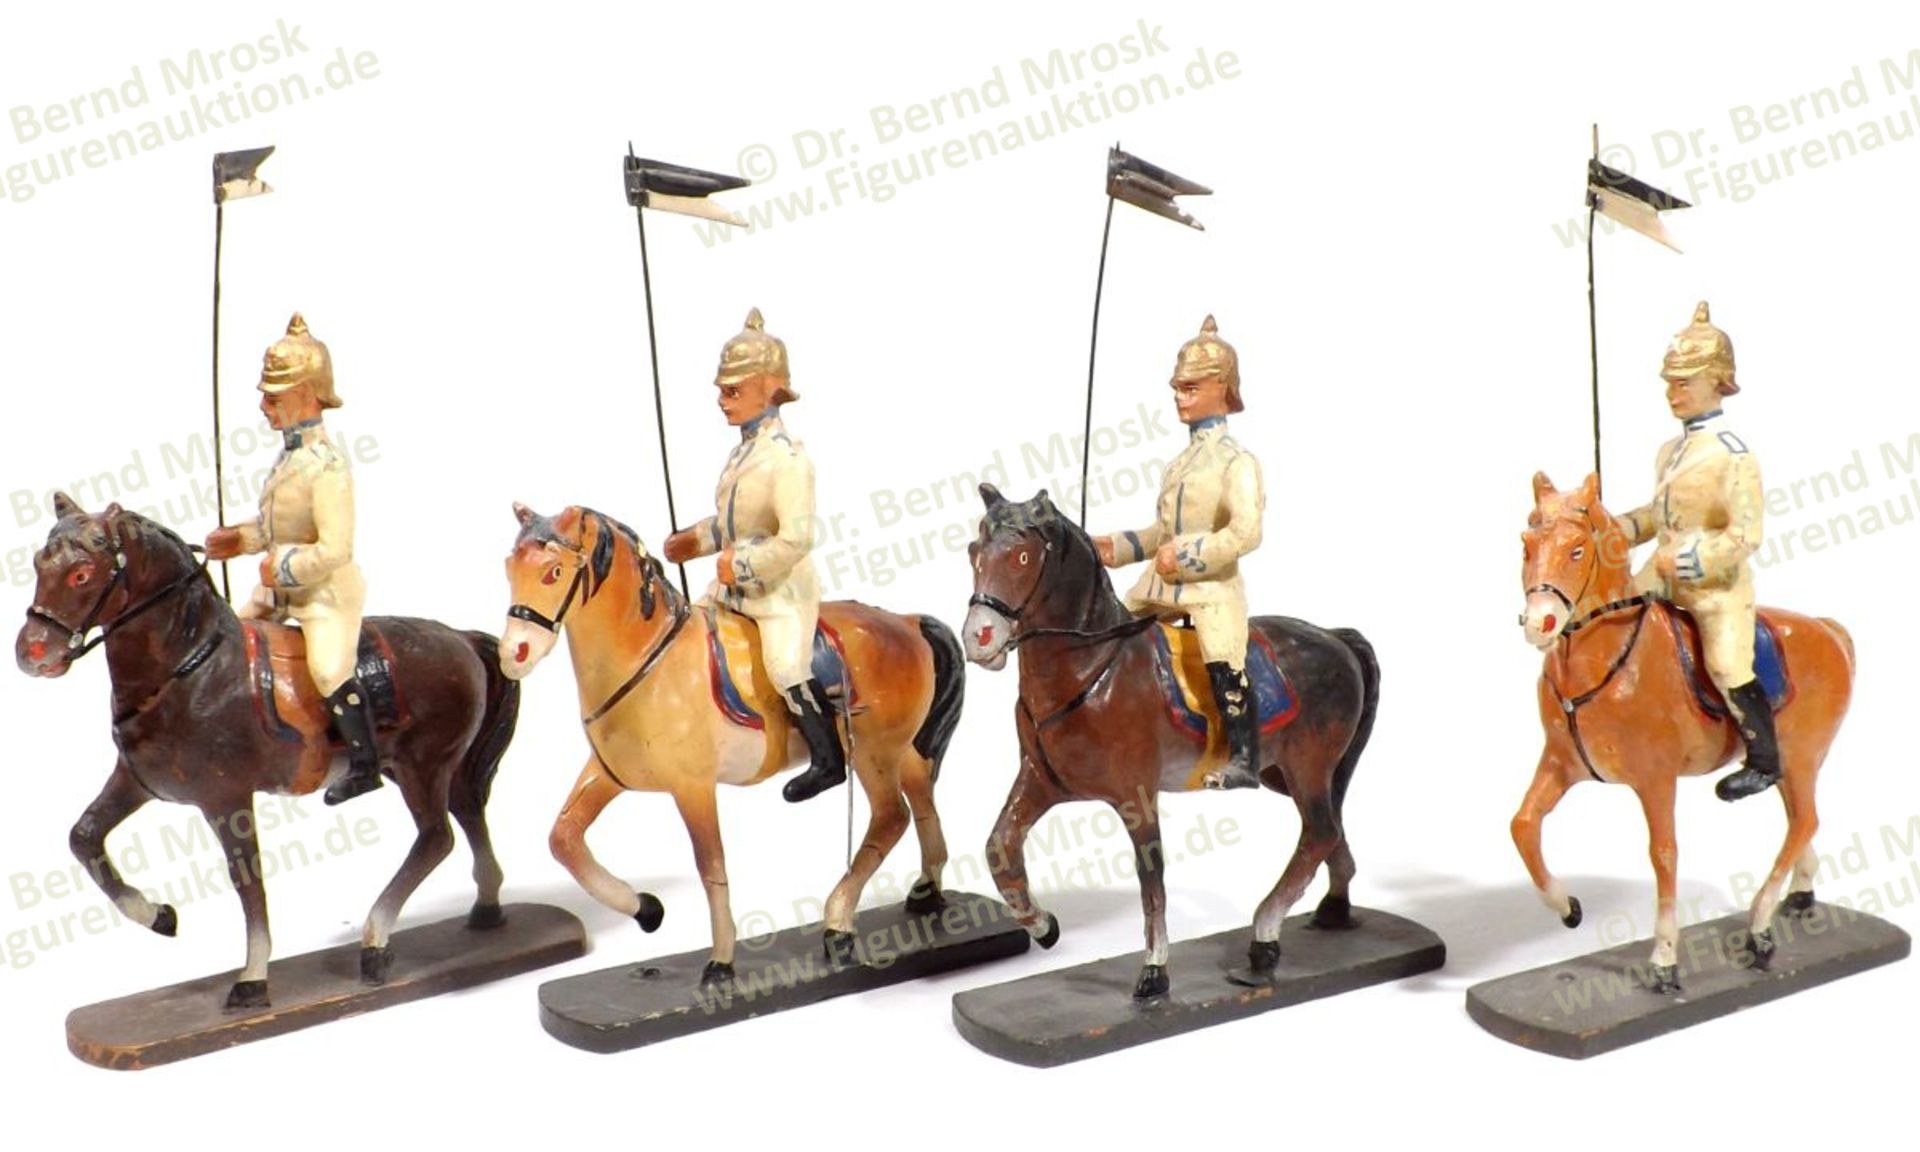 German military, Elastolin, composition figures, 10,5 cm size, made in Germany probably before 1915